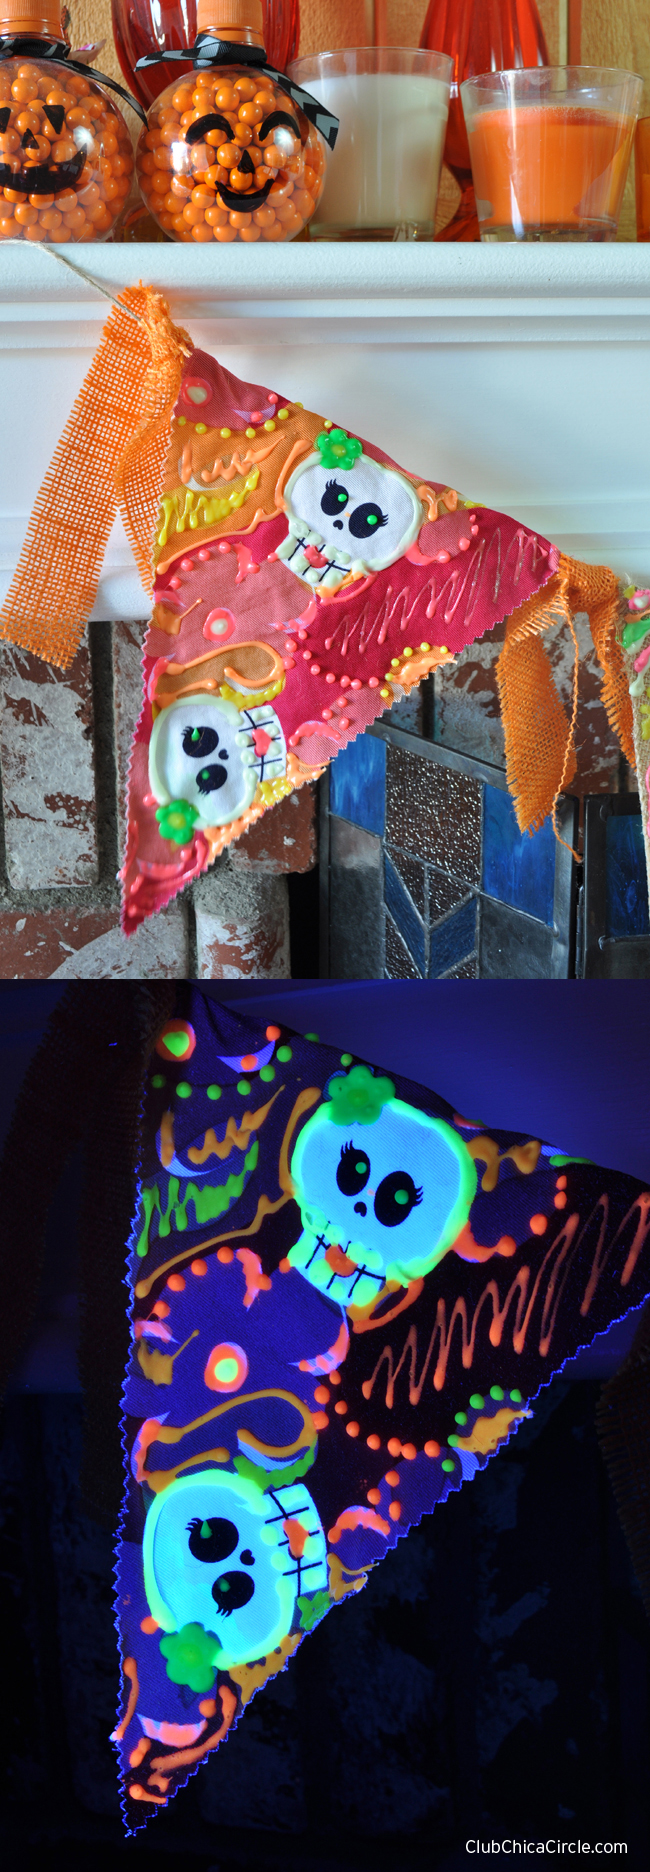 Homemade Glow in the Dark Banner with Tulip paints DIY